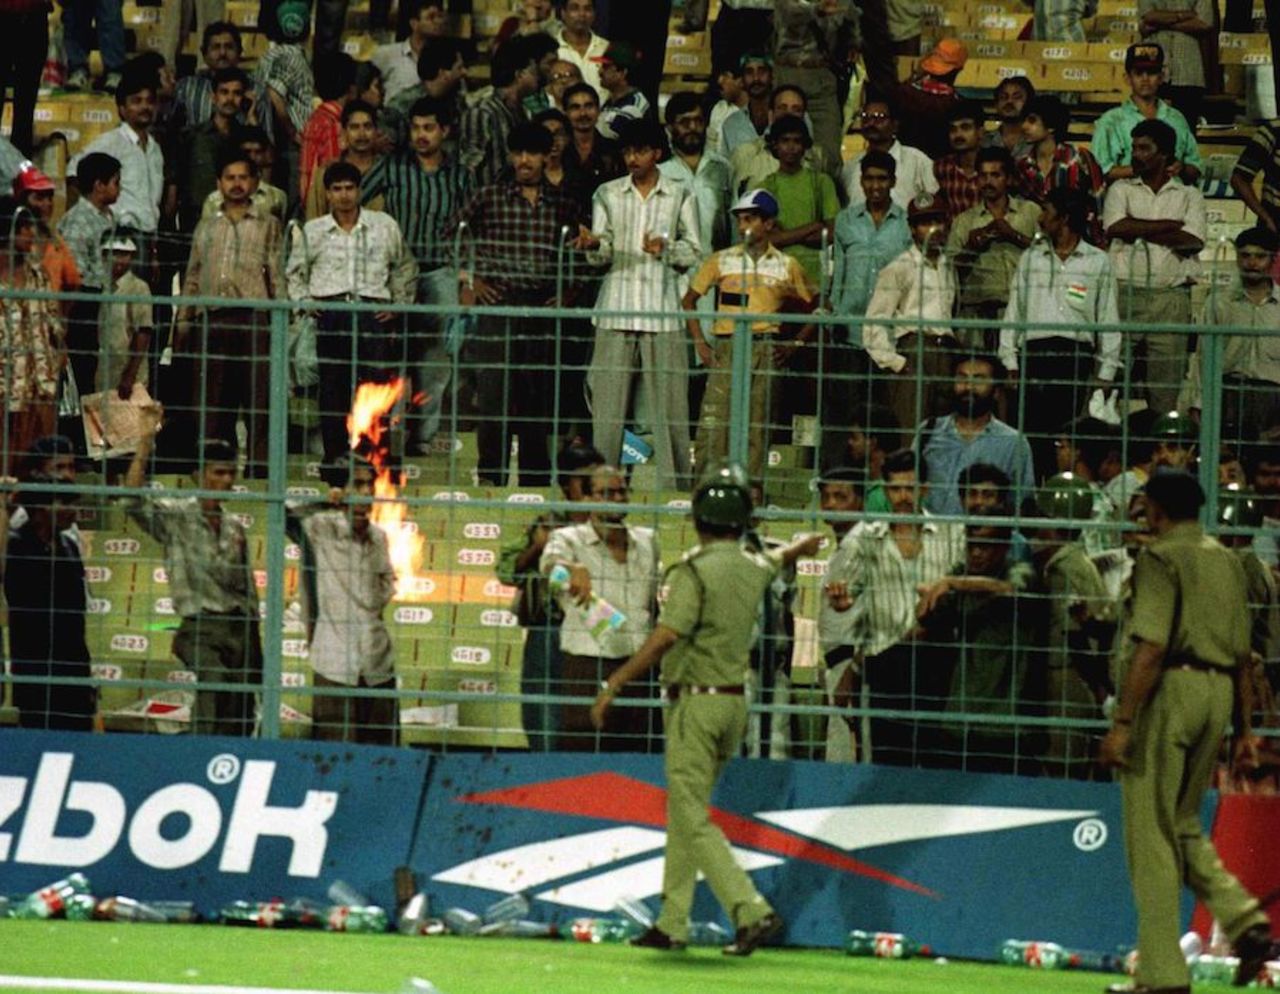 Fanatic Indian supporters cause a riot in the Eden Garden stands, 1st semi-final, India v Sri Lanka, Wills World Cup, Kolkata, March 13, 1996